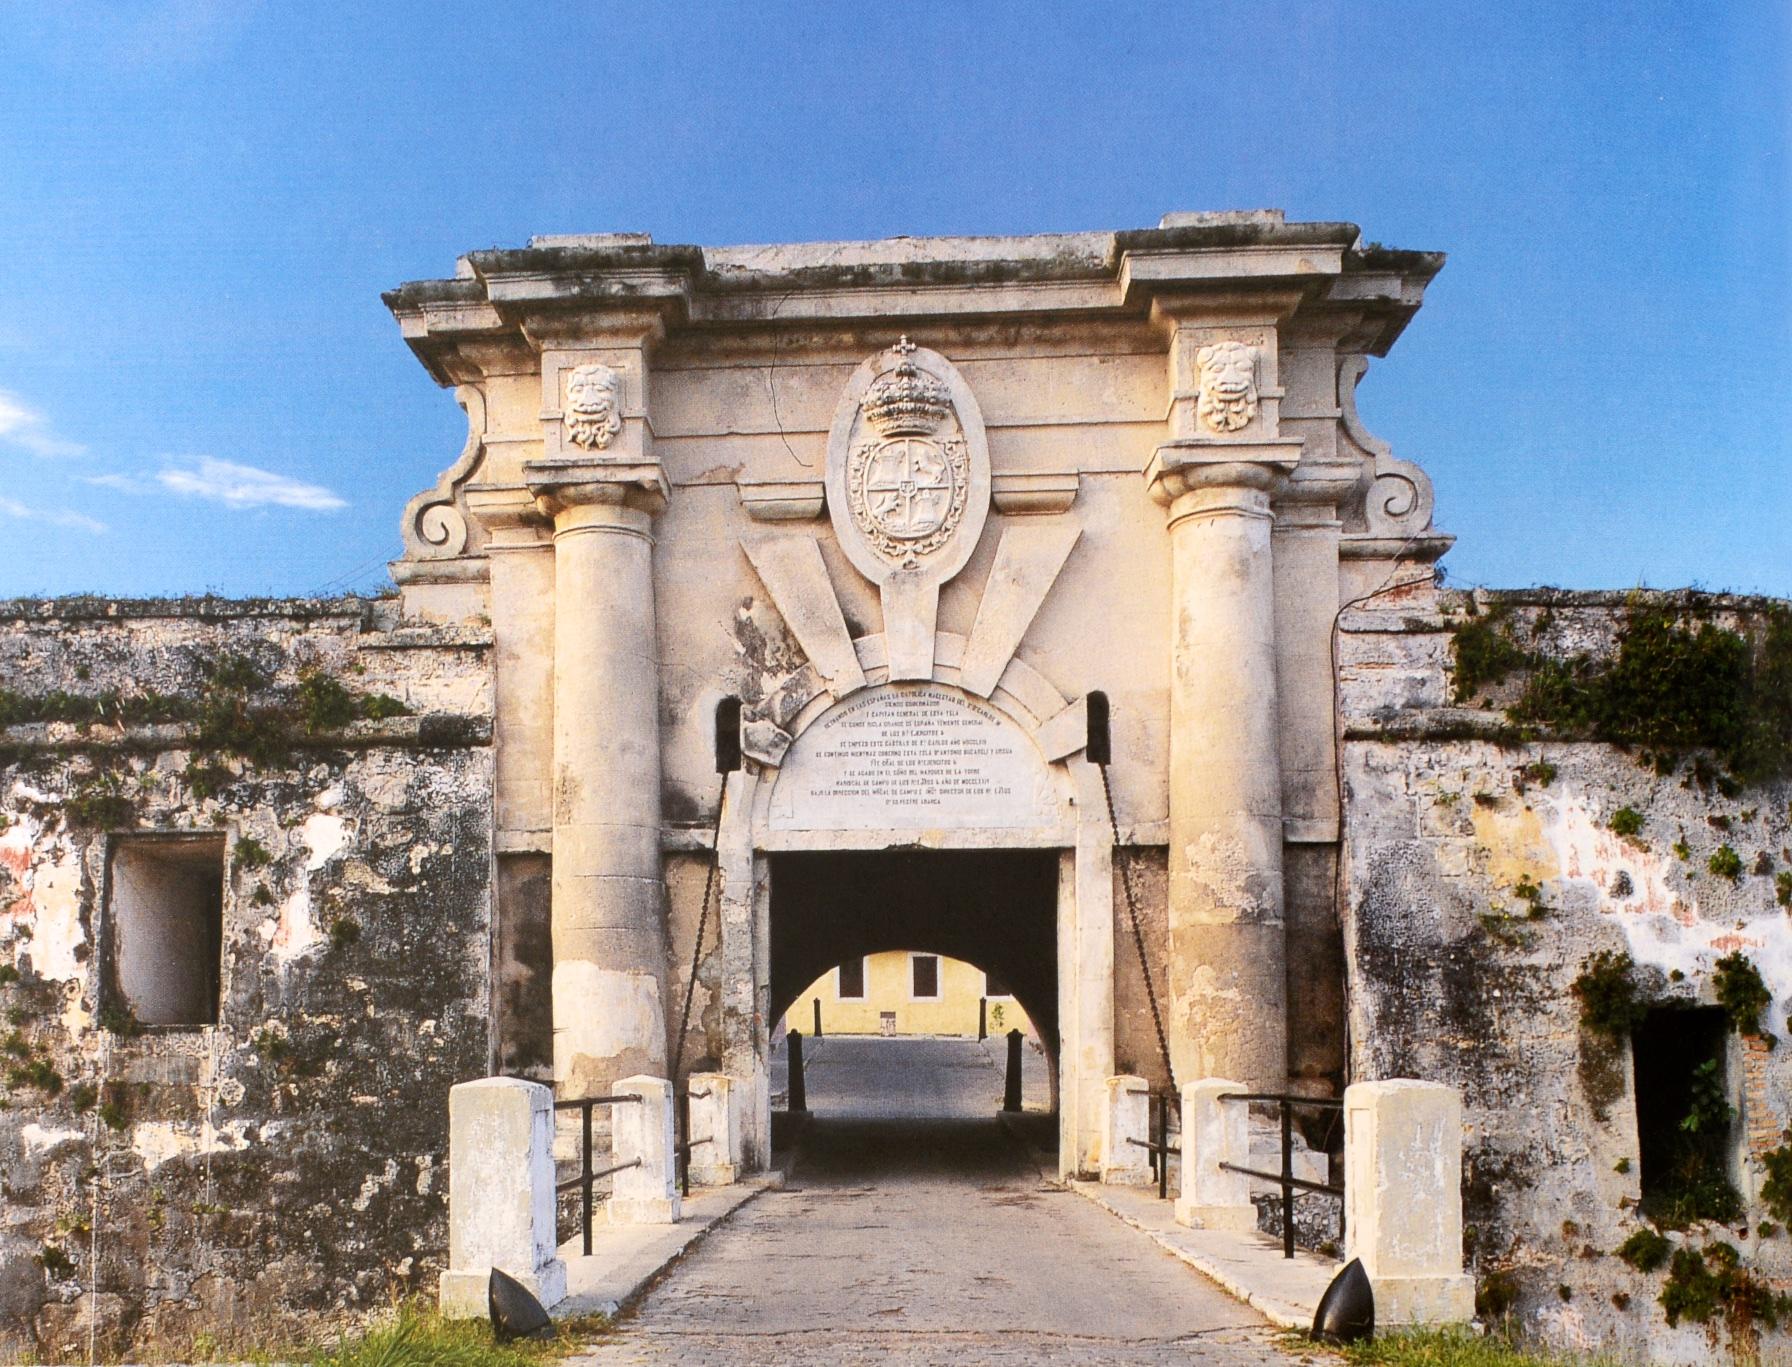 American Cuba: 400 Years of Architectural Heritage by Rachel Carley, Stated 1st Printing